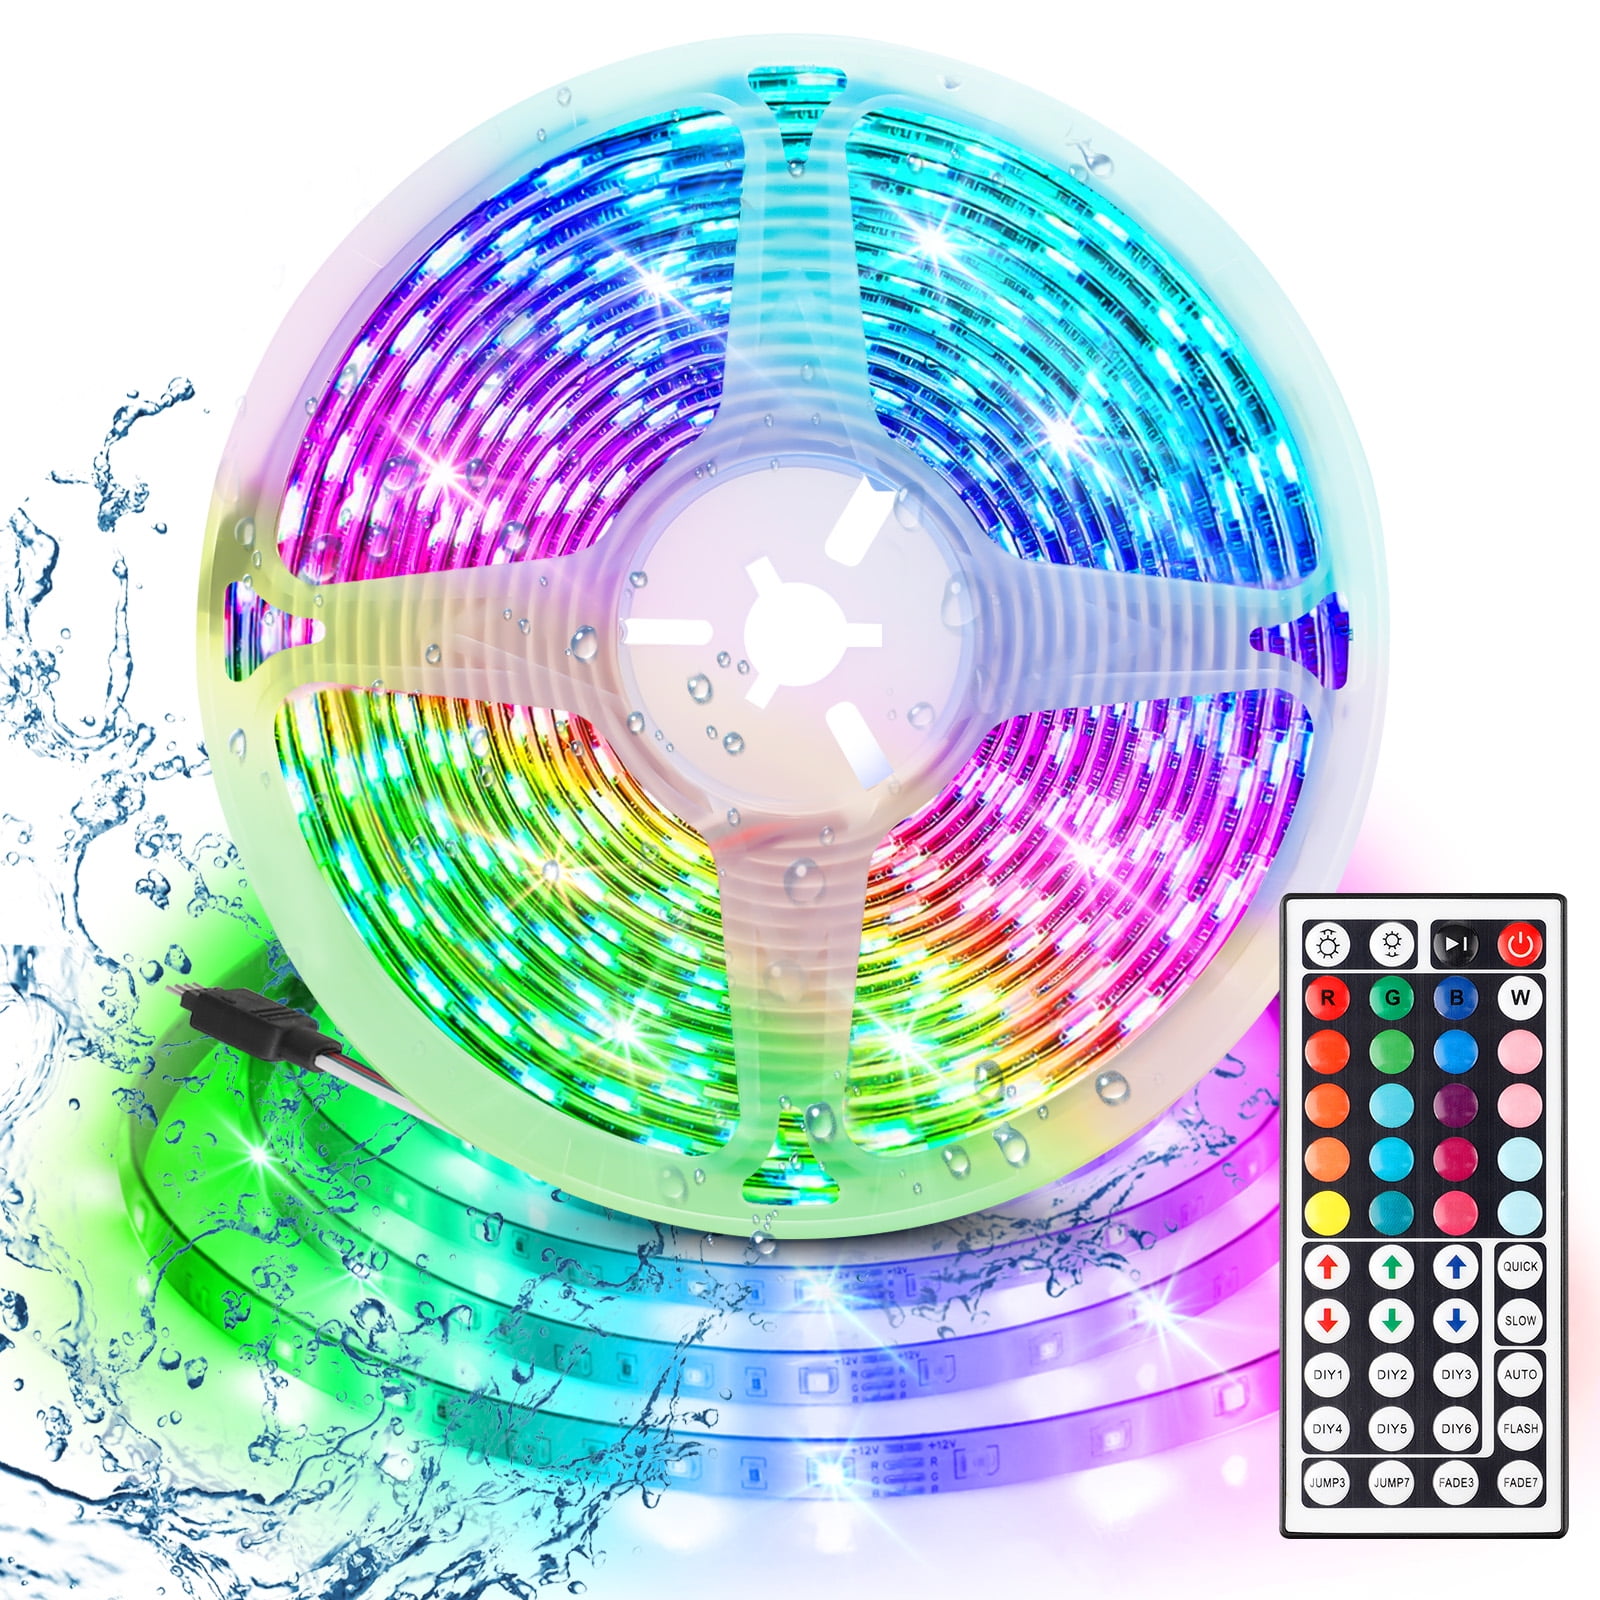 LED Strip Lights 16.4ft LED Music Sync Color Changing Lights with 20key 